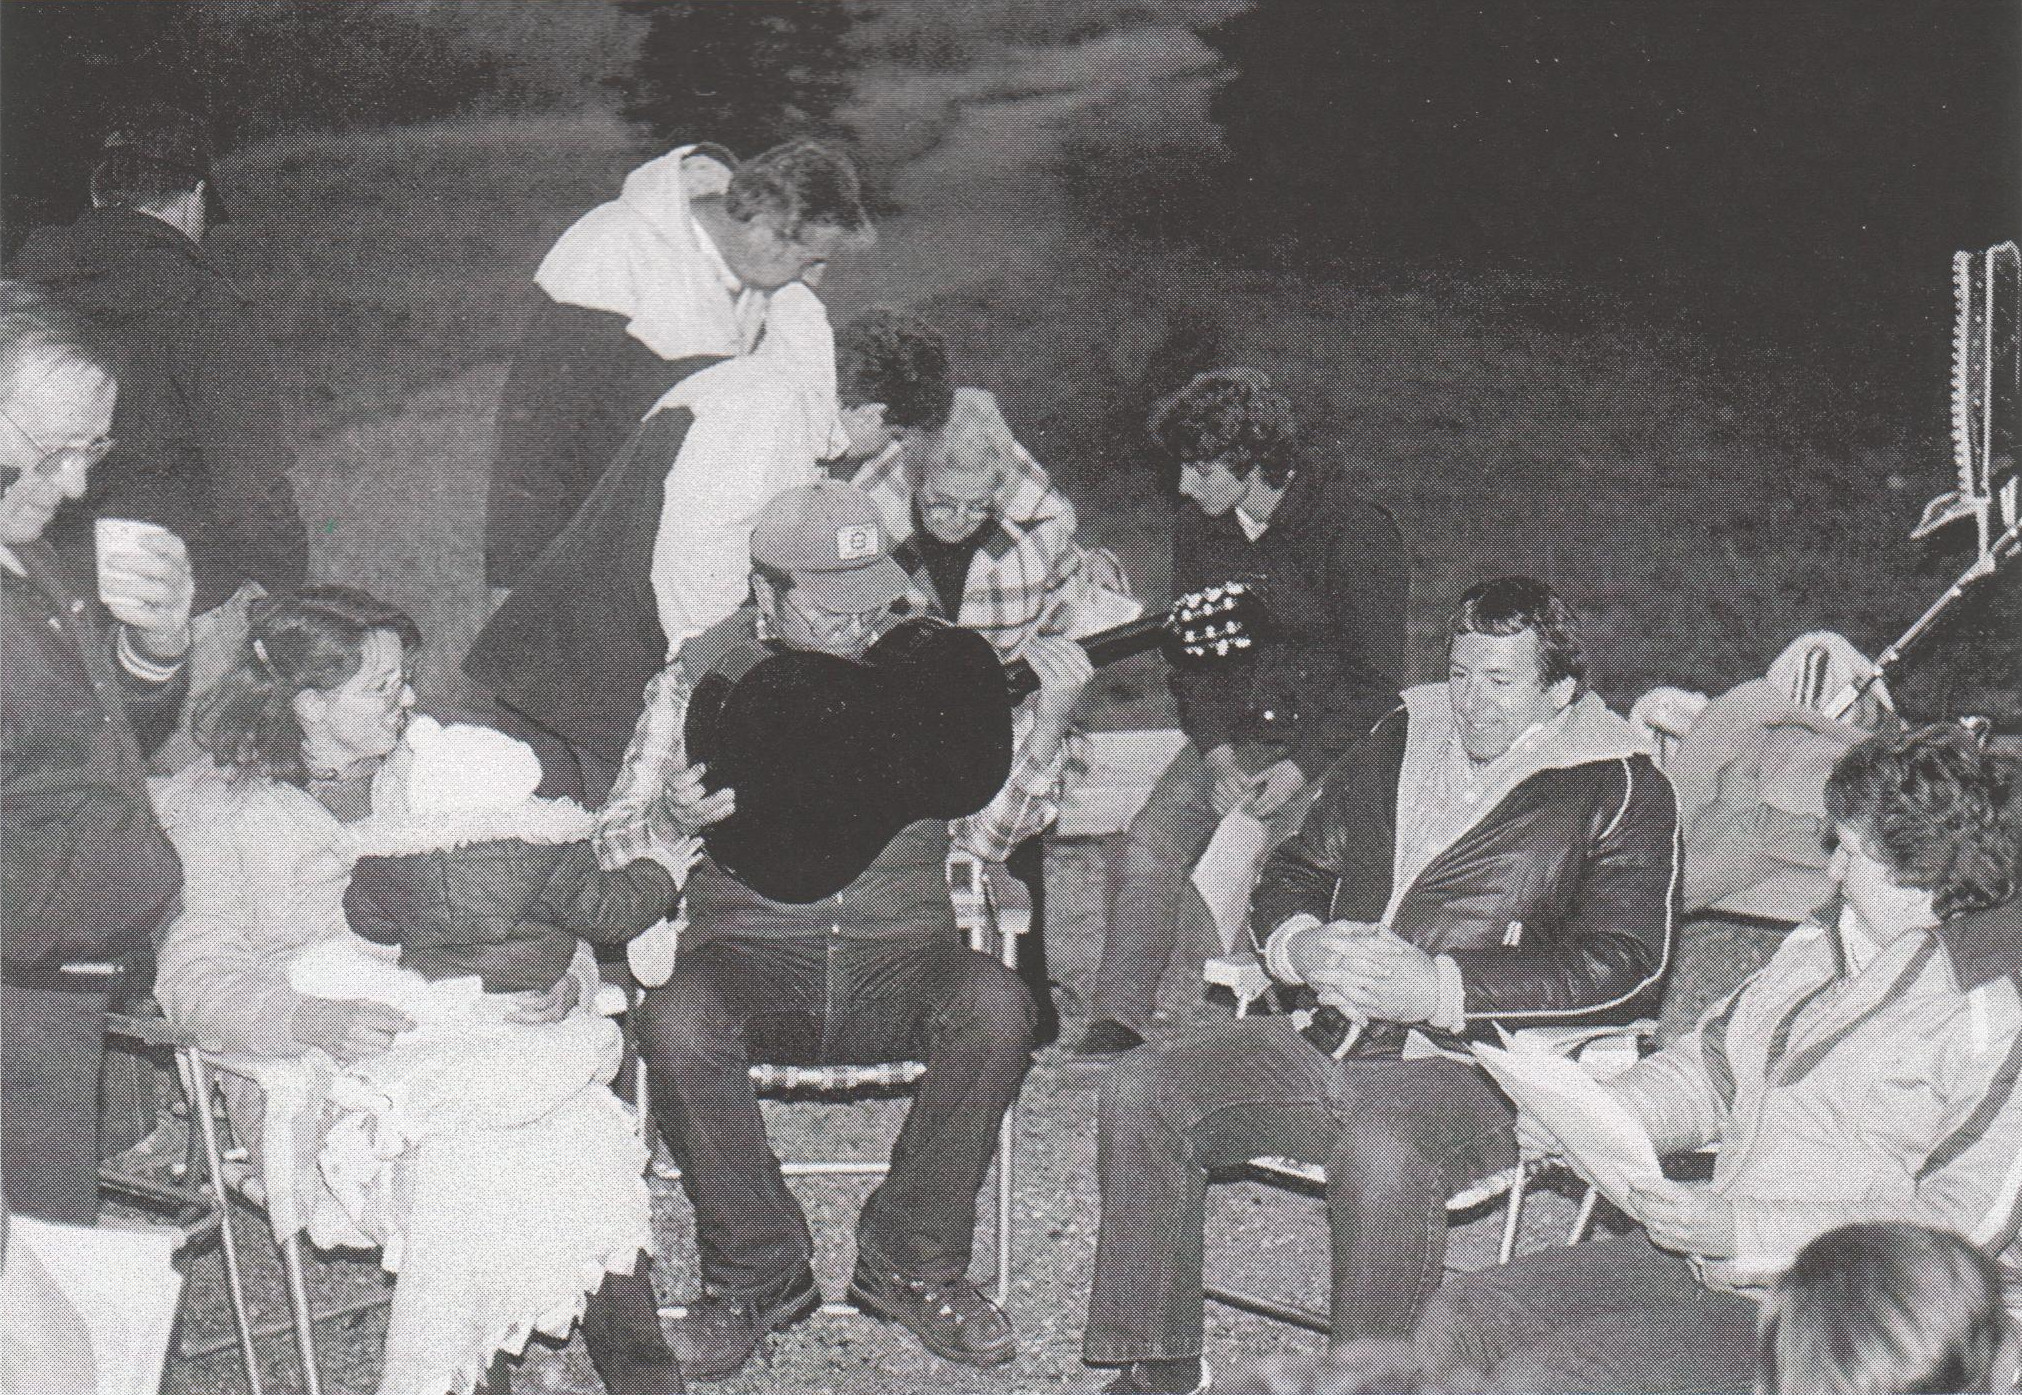 In 1985, David McGraw seems to have dropped his pick into the guitar. Surrounding him are Leigh Blackwell with a coffee in hand, Sharon McGraw with an unidentified baby, Peter Hunziker and Jean Blackwell helping Mrs. Hill sit down beside Mark Ashton, and Richard and Gladys Lemmon getting ready to sing.